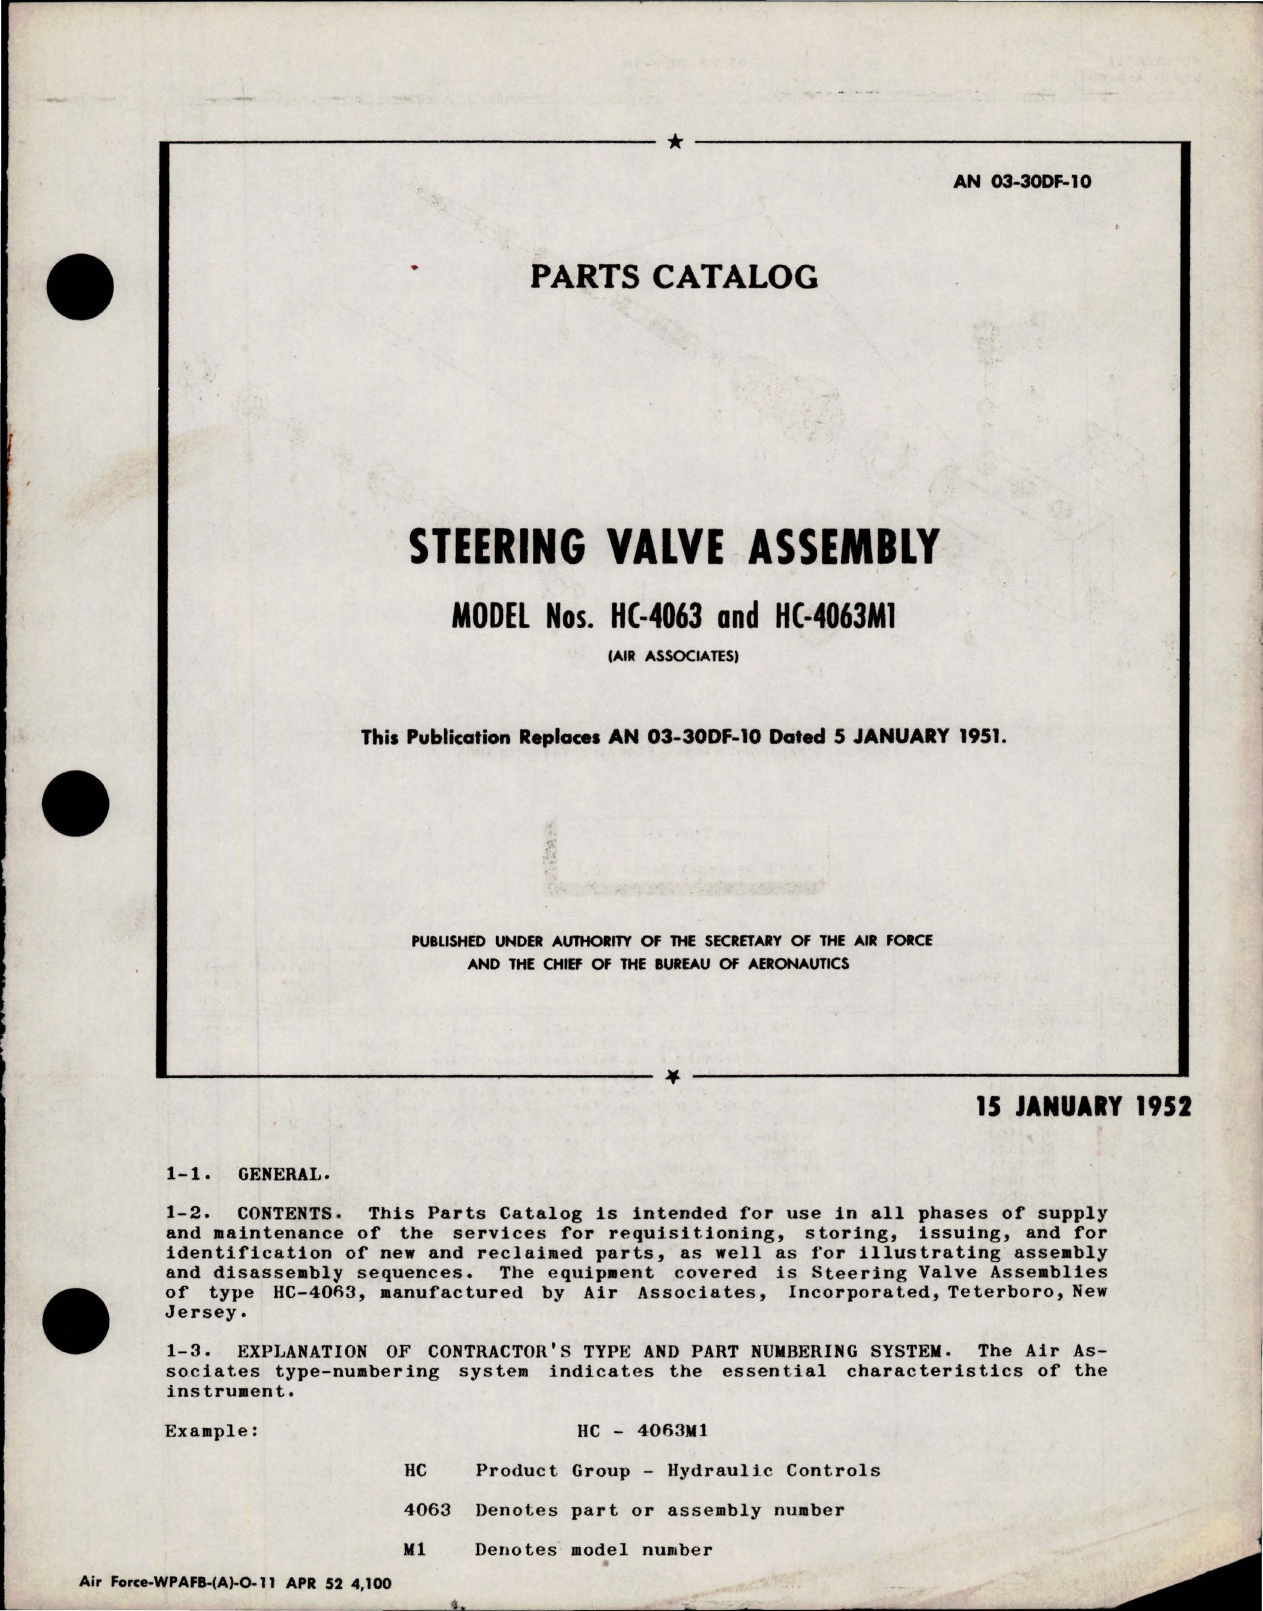 Sample page 1 from AirCorps Library document: Parts Catalog for Steering Valve Assembly - Models HC-4063 and HC-4063M1 